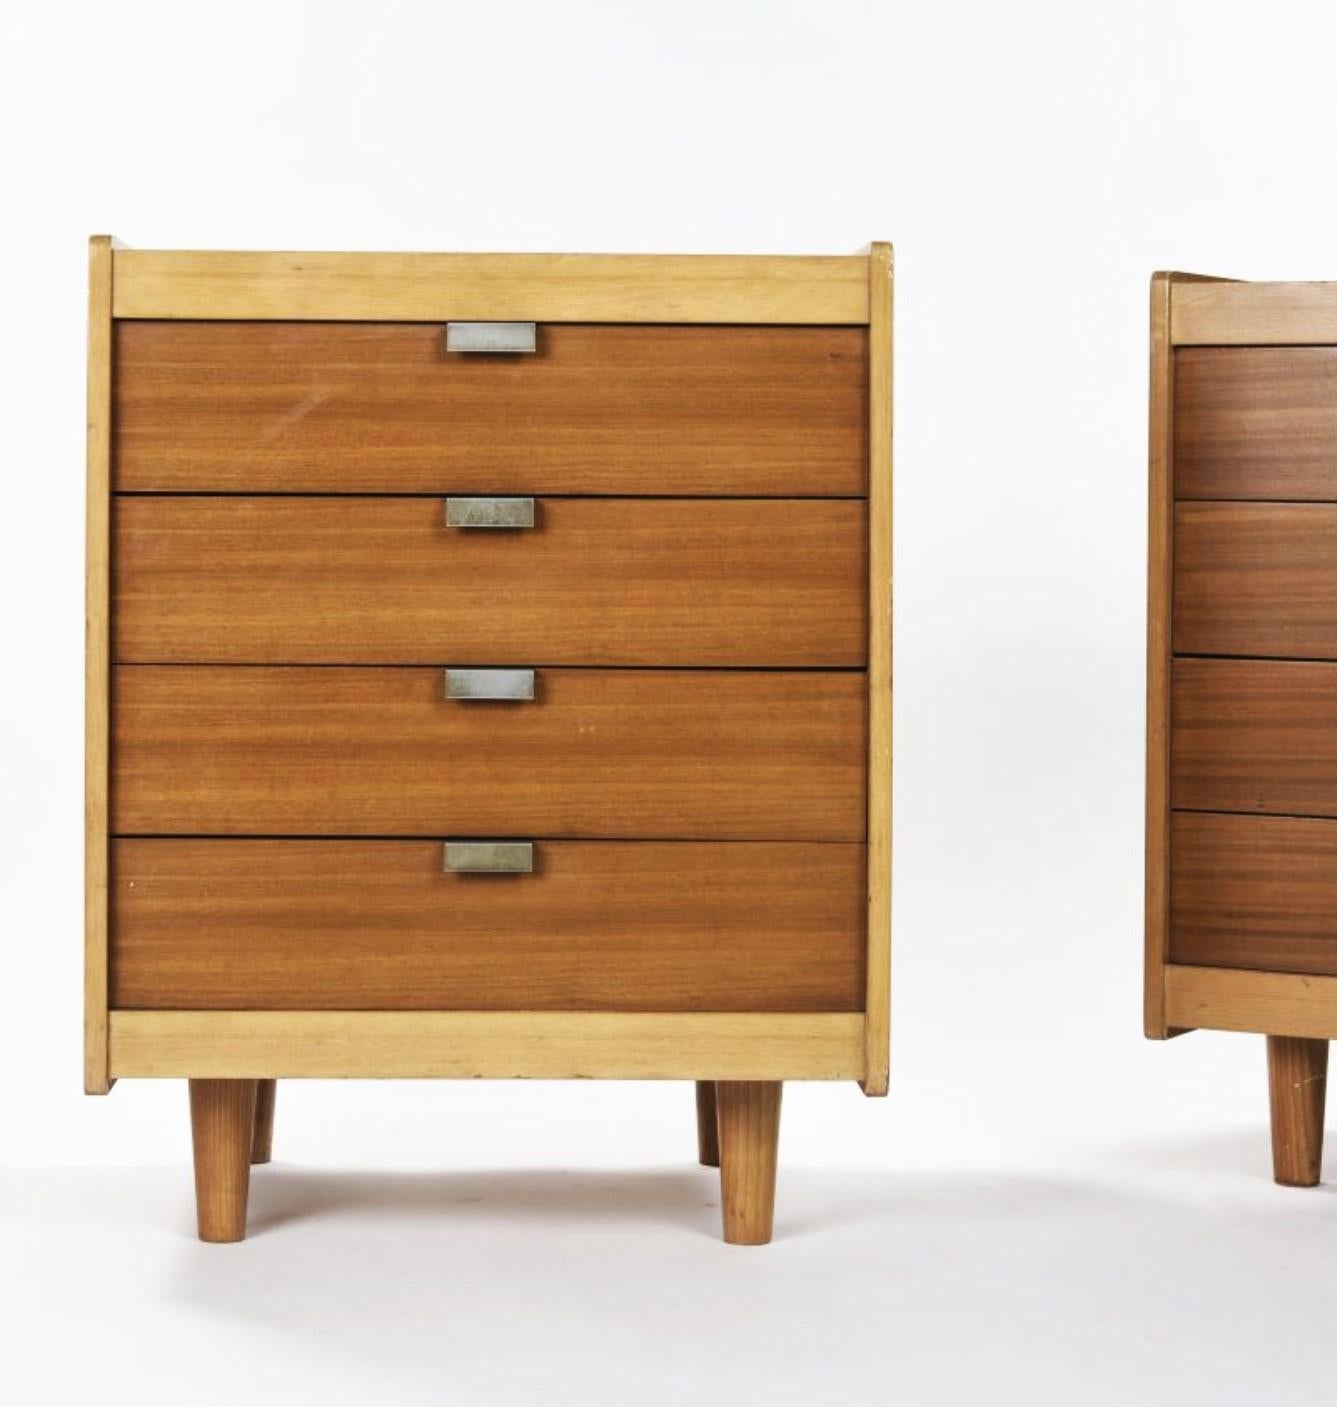 Pair of 4 drawers commode in ash, mahogany and lacquered metal made by Alain Richard and published by Charron Groupe 4 around 1954.

Ash and mahogany chest of drawers opening with four drawers in front. Black top. Wooden legs and rectangular